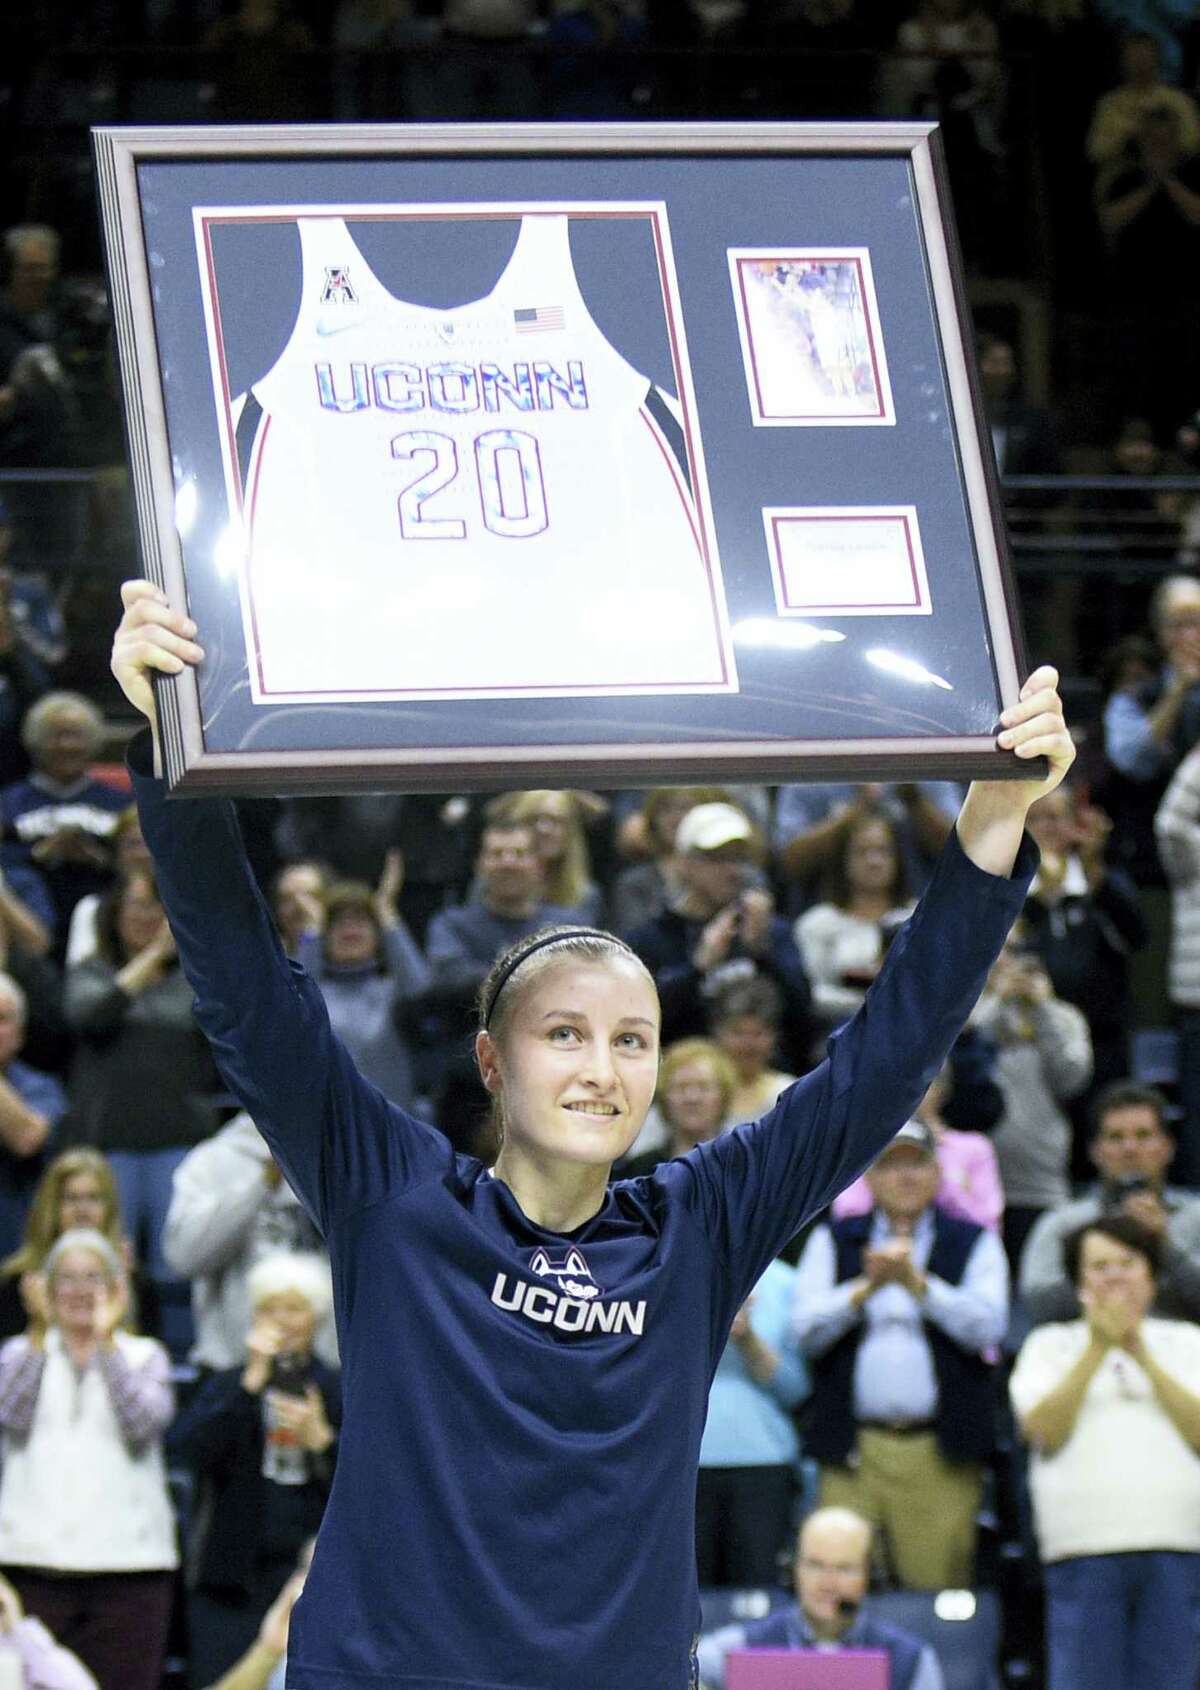 UConn’s Tierney Lawlor holds aloft a plague with her jersey number on Saturday.